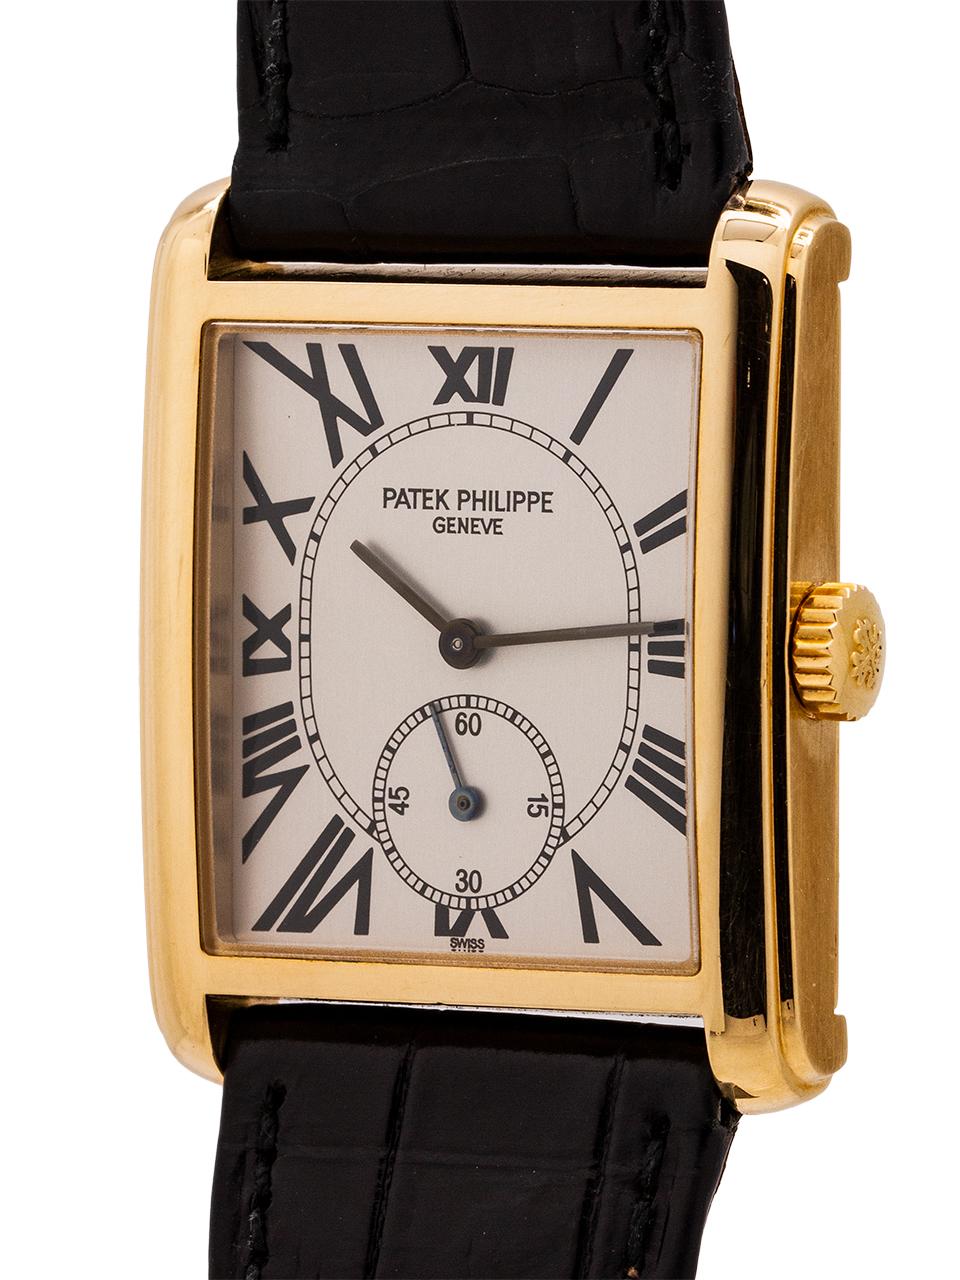 
Patek Philippe Gondolo ref. 5014 circa 1990’s. Featuring a 27 x 35mm yellow gold case with attractive stepped bezel and short lugs. Featuring an original matte silver dial with printed black Roman numerals and thin blued stick hands. Powered by the